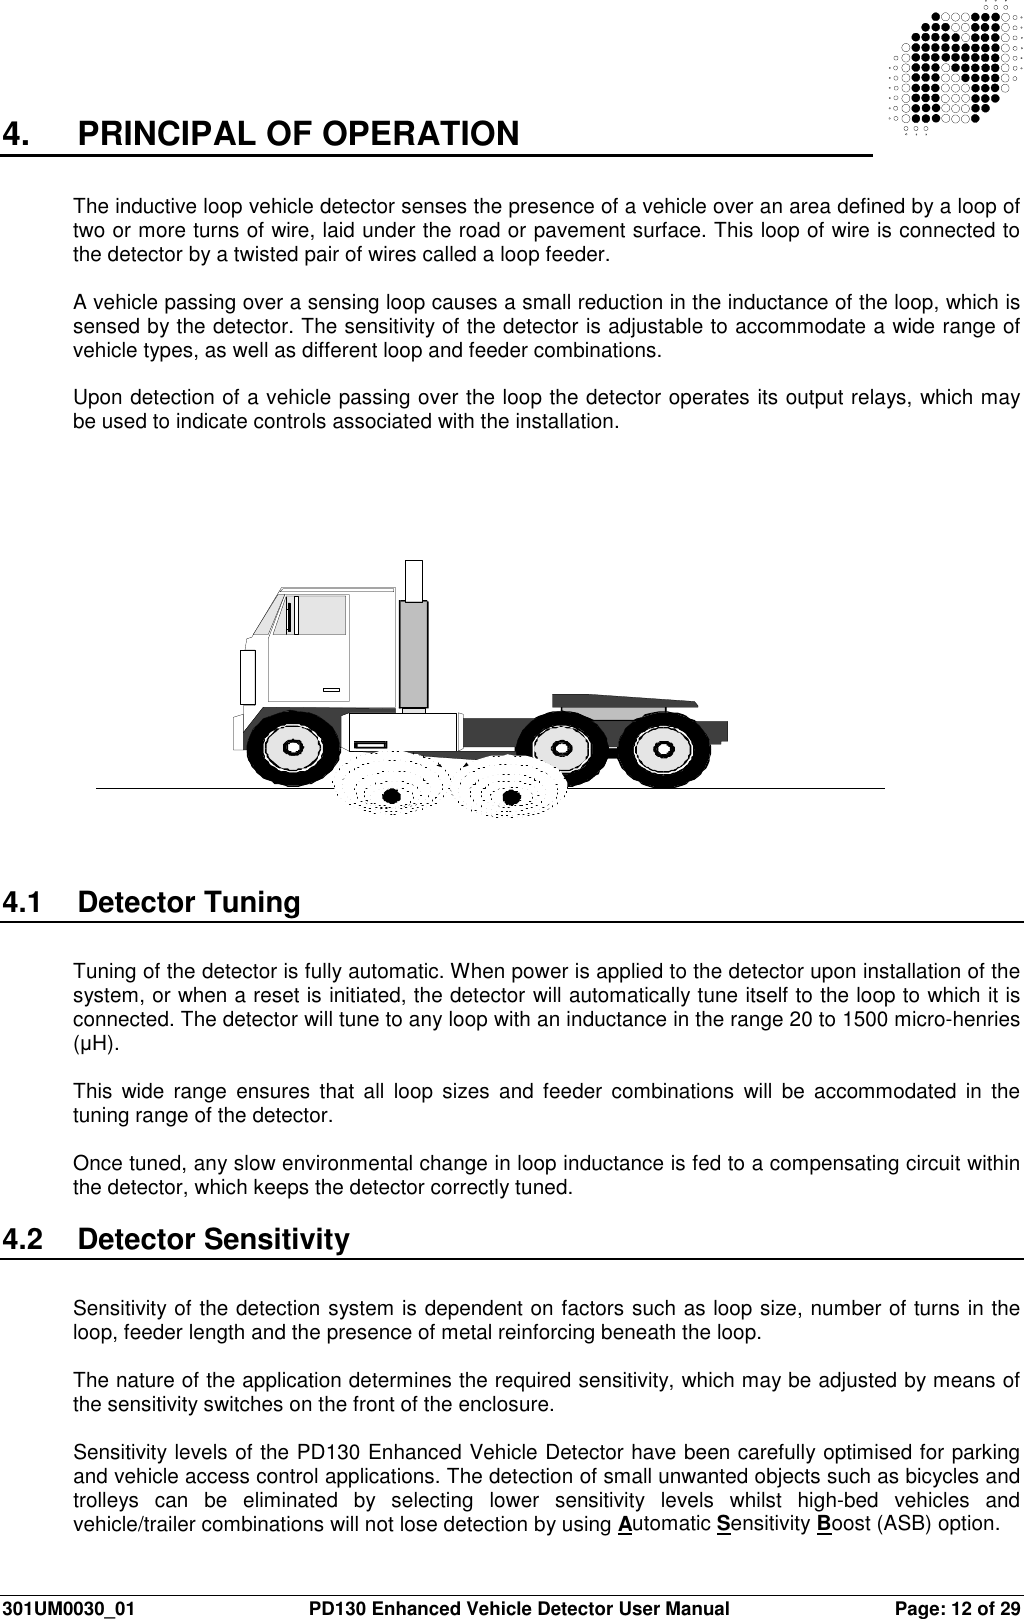  301UM0030_01  PD130 Enhanced Vehicle Detector User Manual  Page: 12 of 29   4.   PRINCIPAL OF OPERATION  The inductive loop vehicle detector senses the presence of a vehicle over an area defined by a loop of two or more turns of wire, laid under the road or pavement surface. This loop of wire is connected to the detector by a twisted pair of wires called a loop feeder.  A vehicle passing over a sensing loop causes a small reduction in the inductance of the loop, which is sensed by the detector. The sensitivity of the detector is adjustable to accommodate a wide range of vehicle types, as well as different loop and feeder combinations.  Upon detection of a vehicle passing over the loop the detector operates its output relays, which may be used to indicate controls associated with the installation.   4.1  Detector Tuning  Tuning of the detector is fully automatic. When power is applied to the detector upon installation of the system, or when a reset is initiated, the detector will automatically tune itself to the loop to which it is connected. The detector will tune to any loop with an inductance in the range 20 to 1500 micro-henries (µH).  This  wide range  ensures  that  all  loop  sizes  and  feeder  combinations  will  be  accommodated  in  the tuning range of the detector.  Once tuned, any slow environmental change in loop inductance is fed to a compensating circuit within the detector, which keeps the detector correctly tuned.  4.2  Detector Sensitivity  Sensitivity of the detection system is dependent on factors such as loop size, number of turns in the loop, feeder length and the presence of metal reinforcing beneath the loop.  The nature of the application determines the required sensitivity, which may be adjusted by means of the sensitivity switches on the front of the enclosure.  Sensitivity levels of the PD130 Enhanced Vehicle Detector have been carefully optimised for parking and vehicle access control applications. The detection of small unwanted objects such as bicycles and trolleys  can  be  eliminated  by  selecting  lower  sensitivity  levels  whilst  high-bed  vehicles  and vehicle/trailer combinations will not lose detection by using Automatic Sensitivity Boost (ASB) option. 